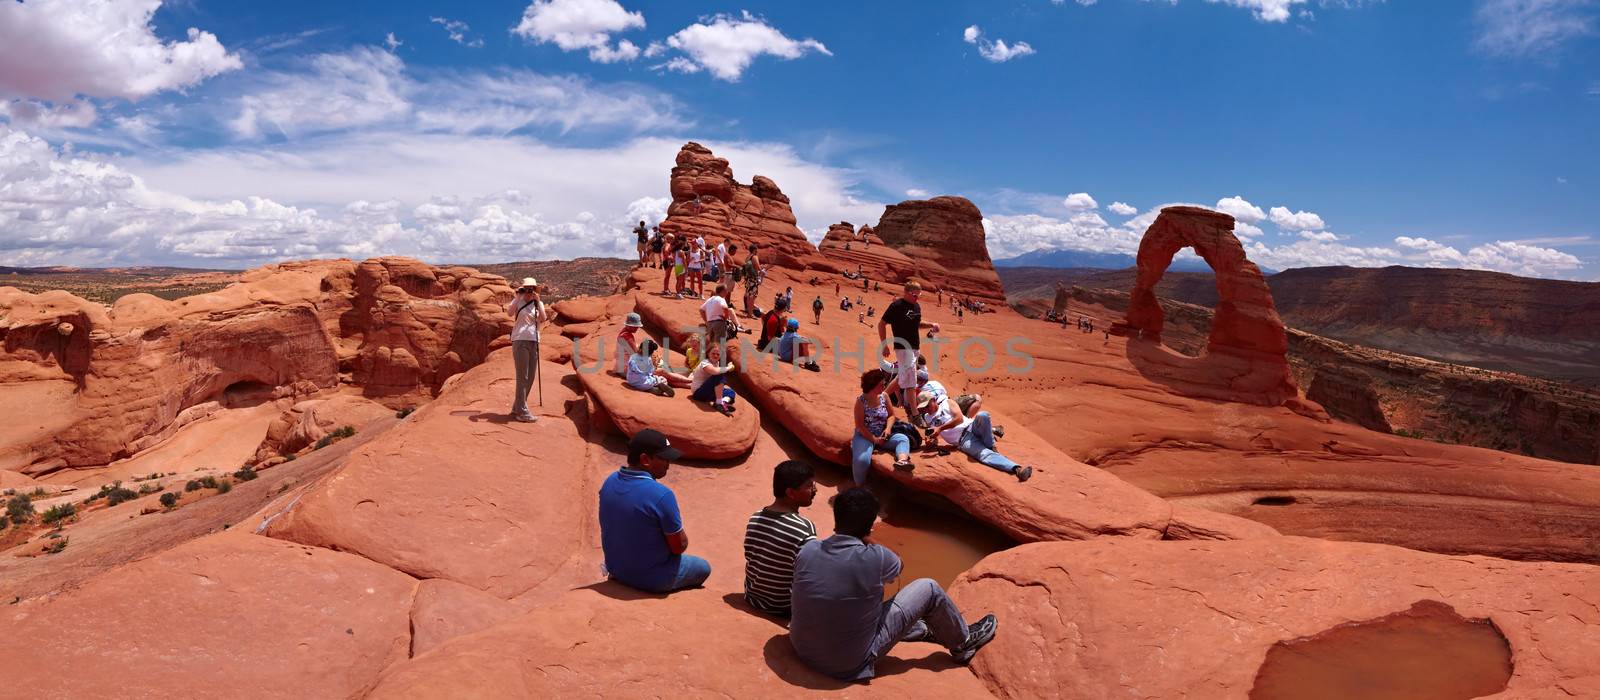 Tourists, Delicate Arch on background, Arches National Park, Utah, USA